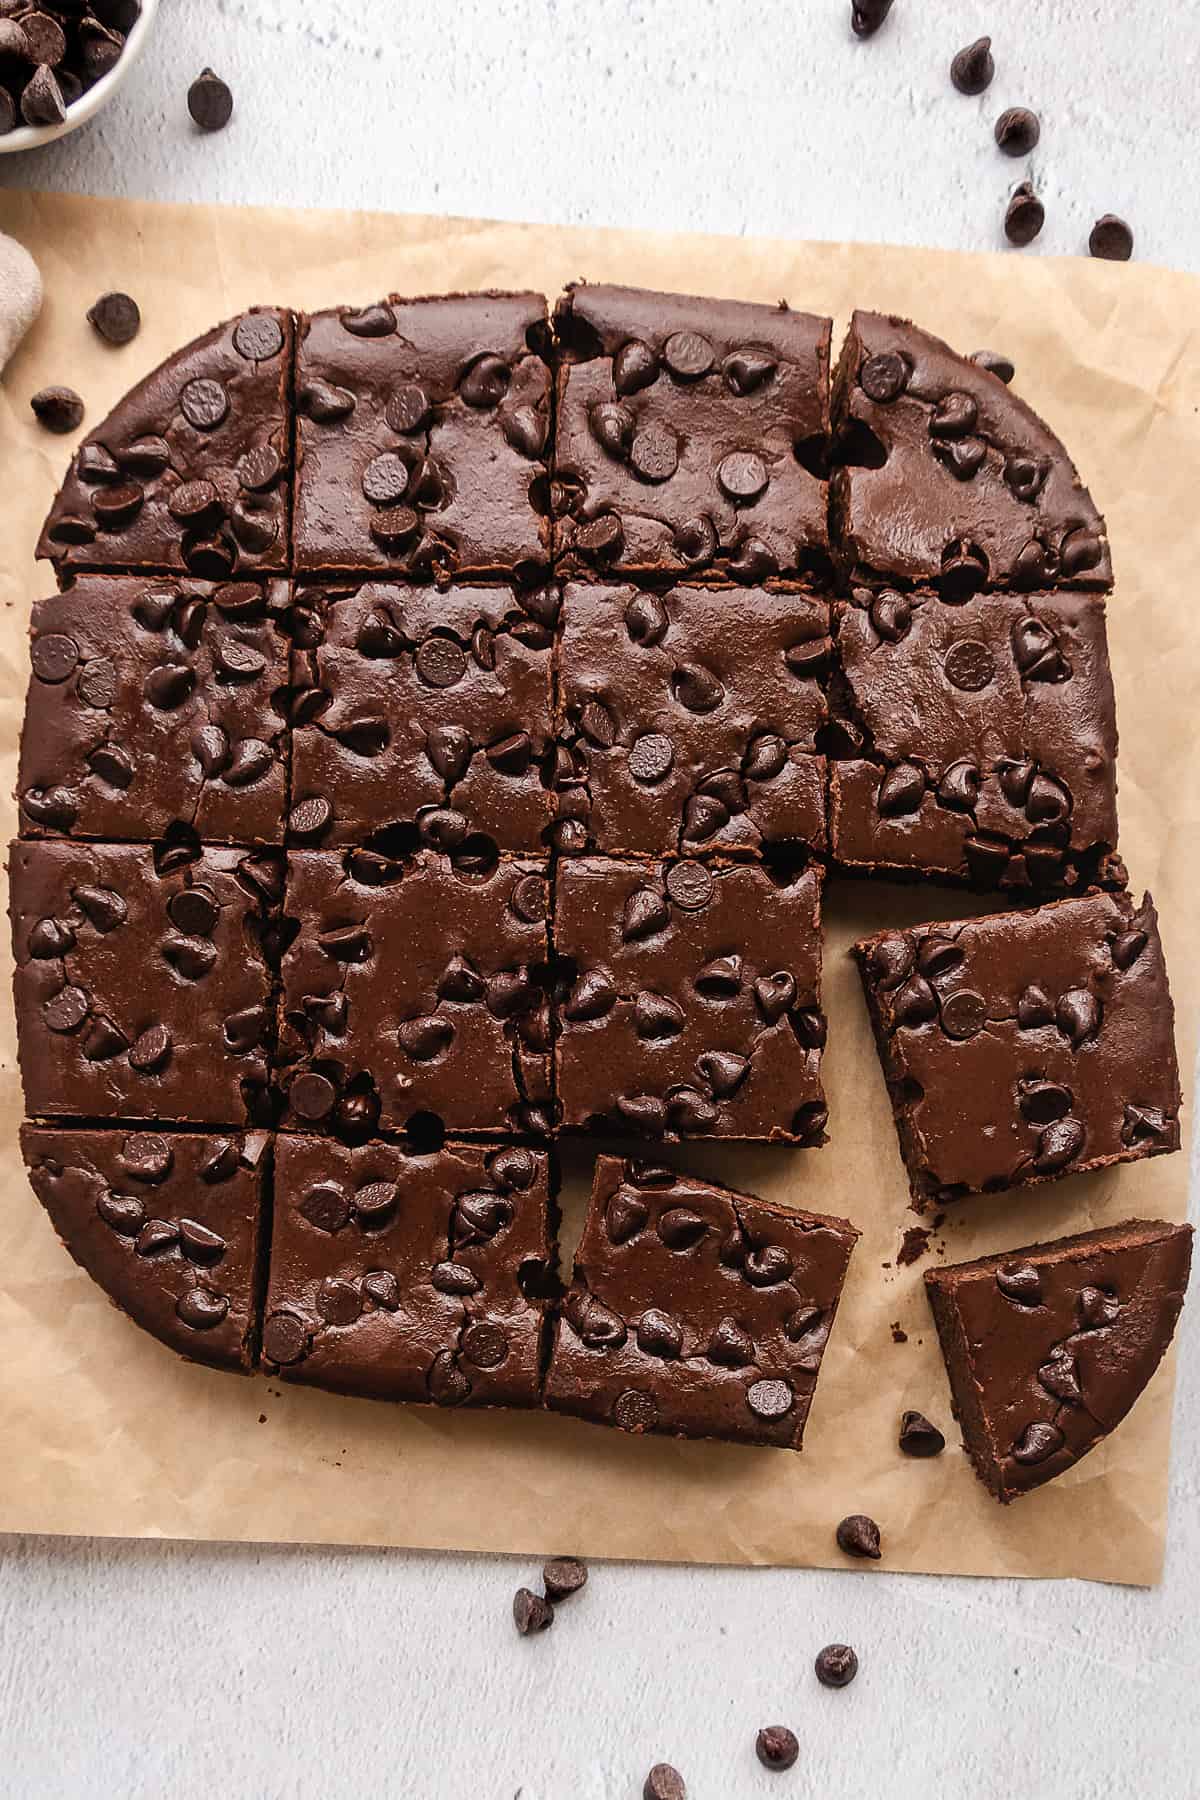 sliced brownies with chocolate chips on parchment paper.